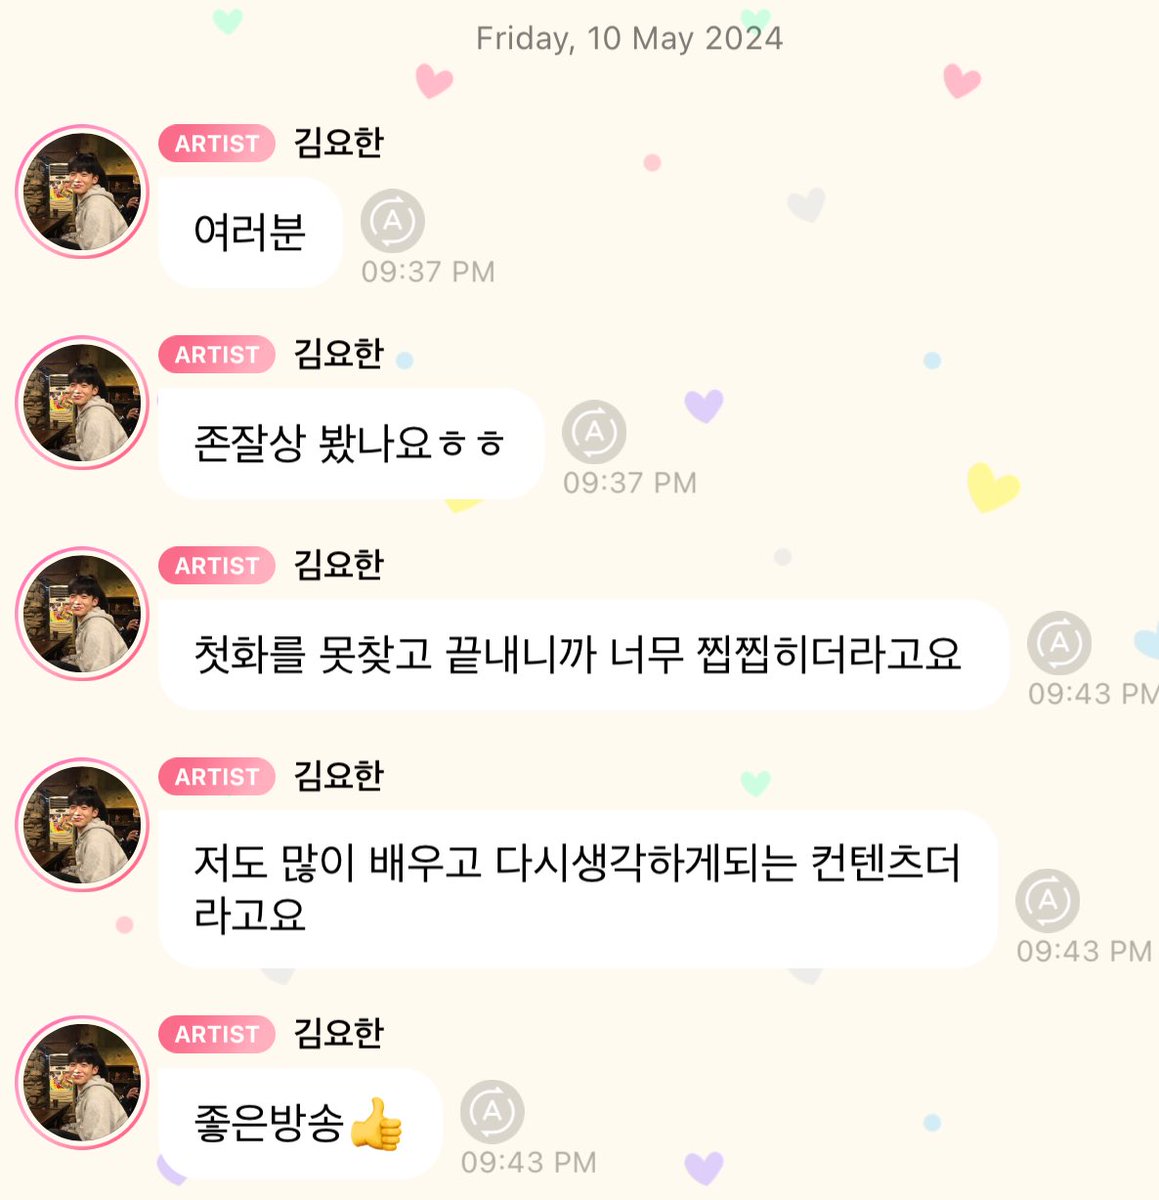 Yohan bb.l update 100524

“Guys!”
“Did you see it haha”

“Felt so bad I couldn't  find the first episode and it was finished..” 

“It's content that makes me learn a lot and think again.”

“good show 👍🏻”

#KIMYOHAN #김요한